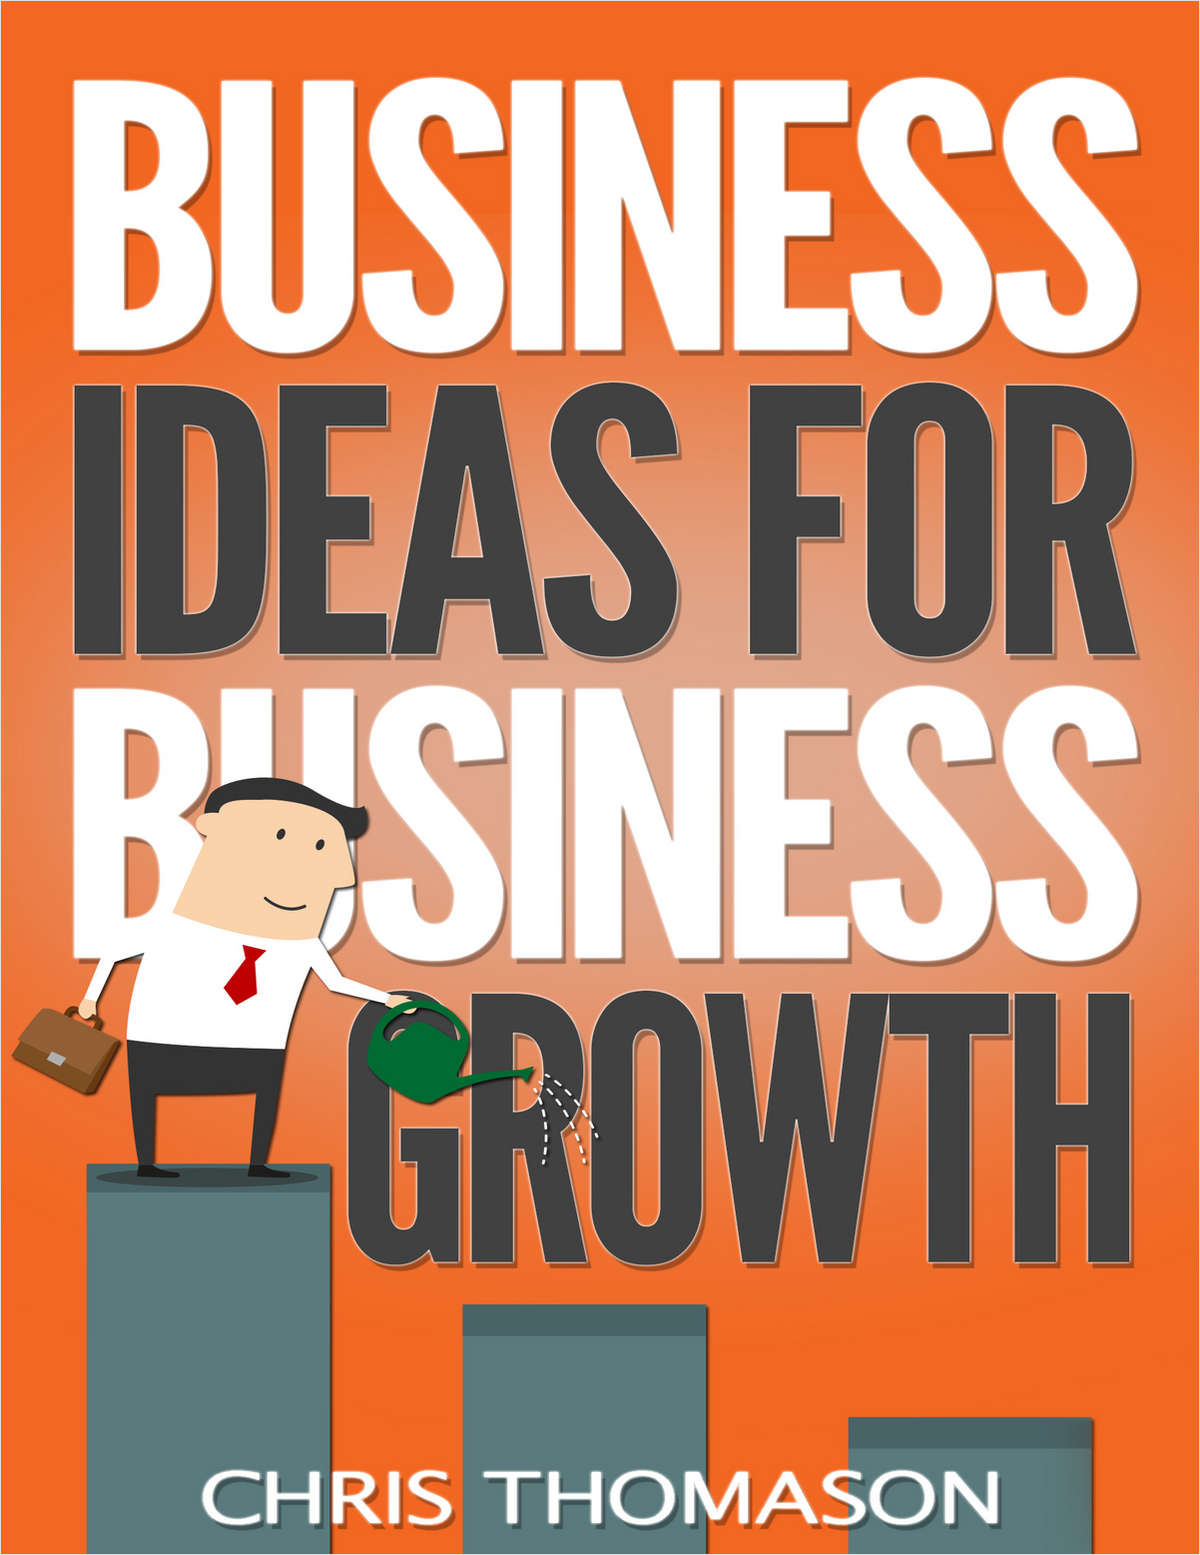 Business Ideas for Business Growth